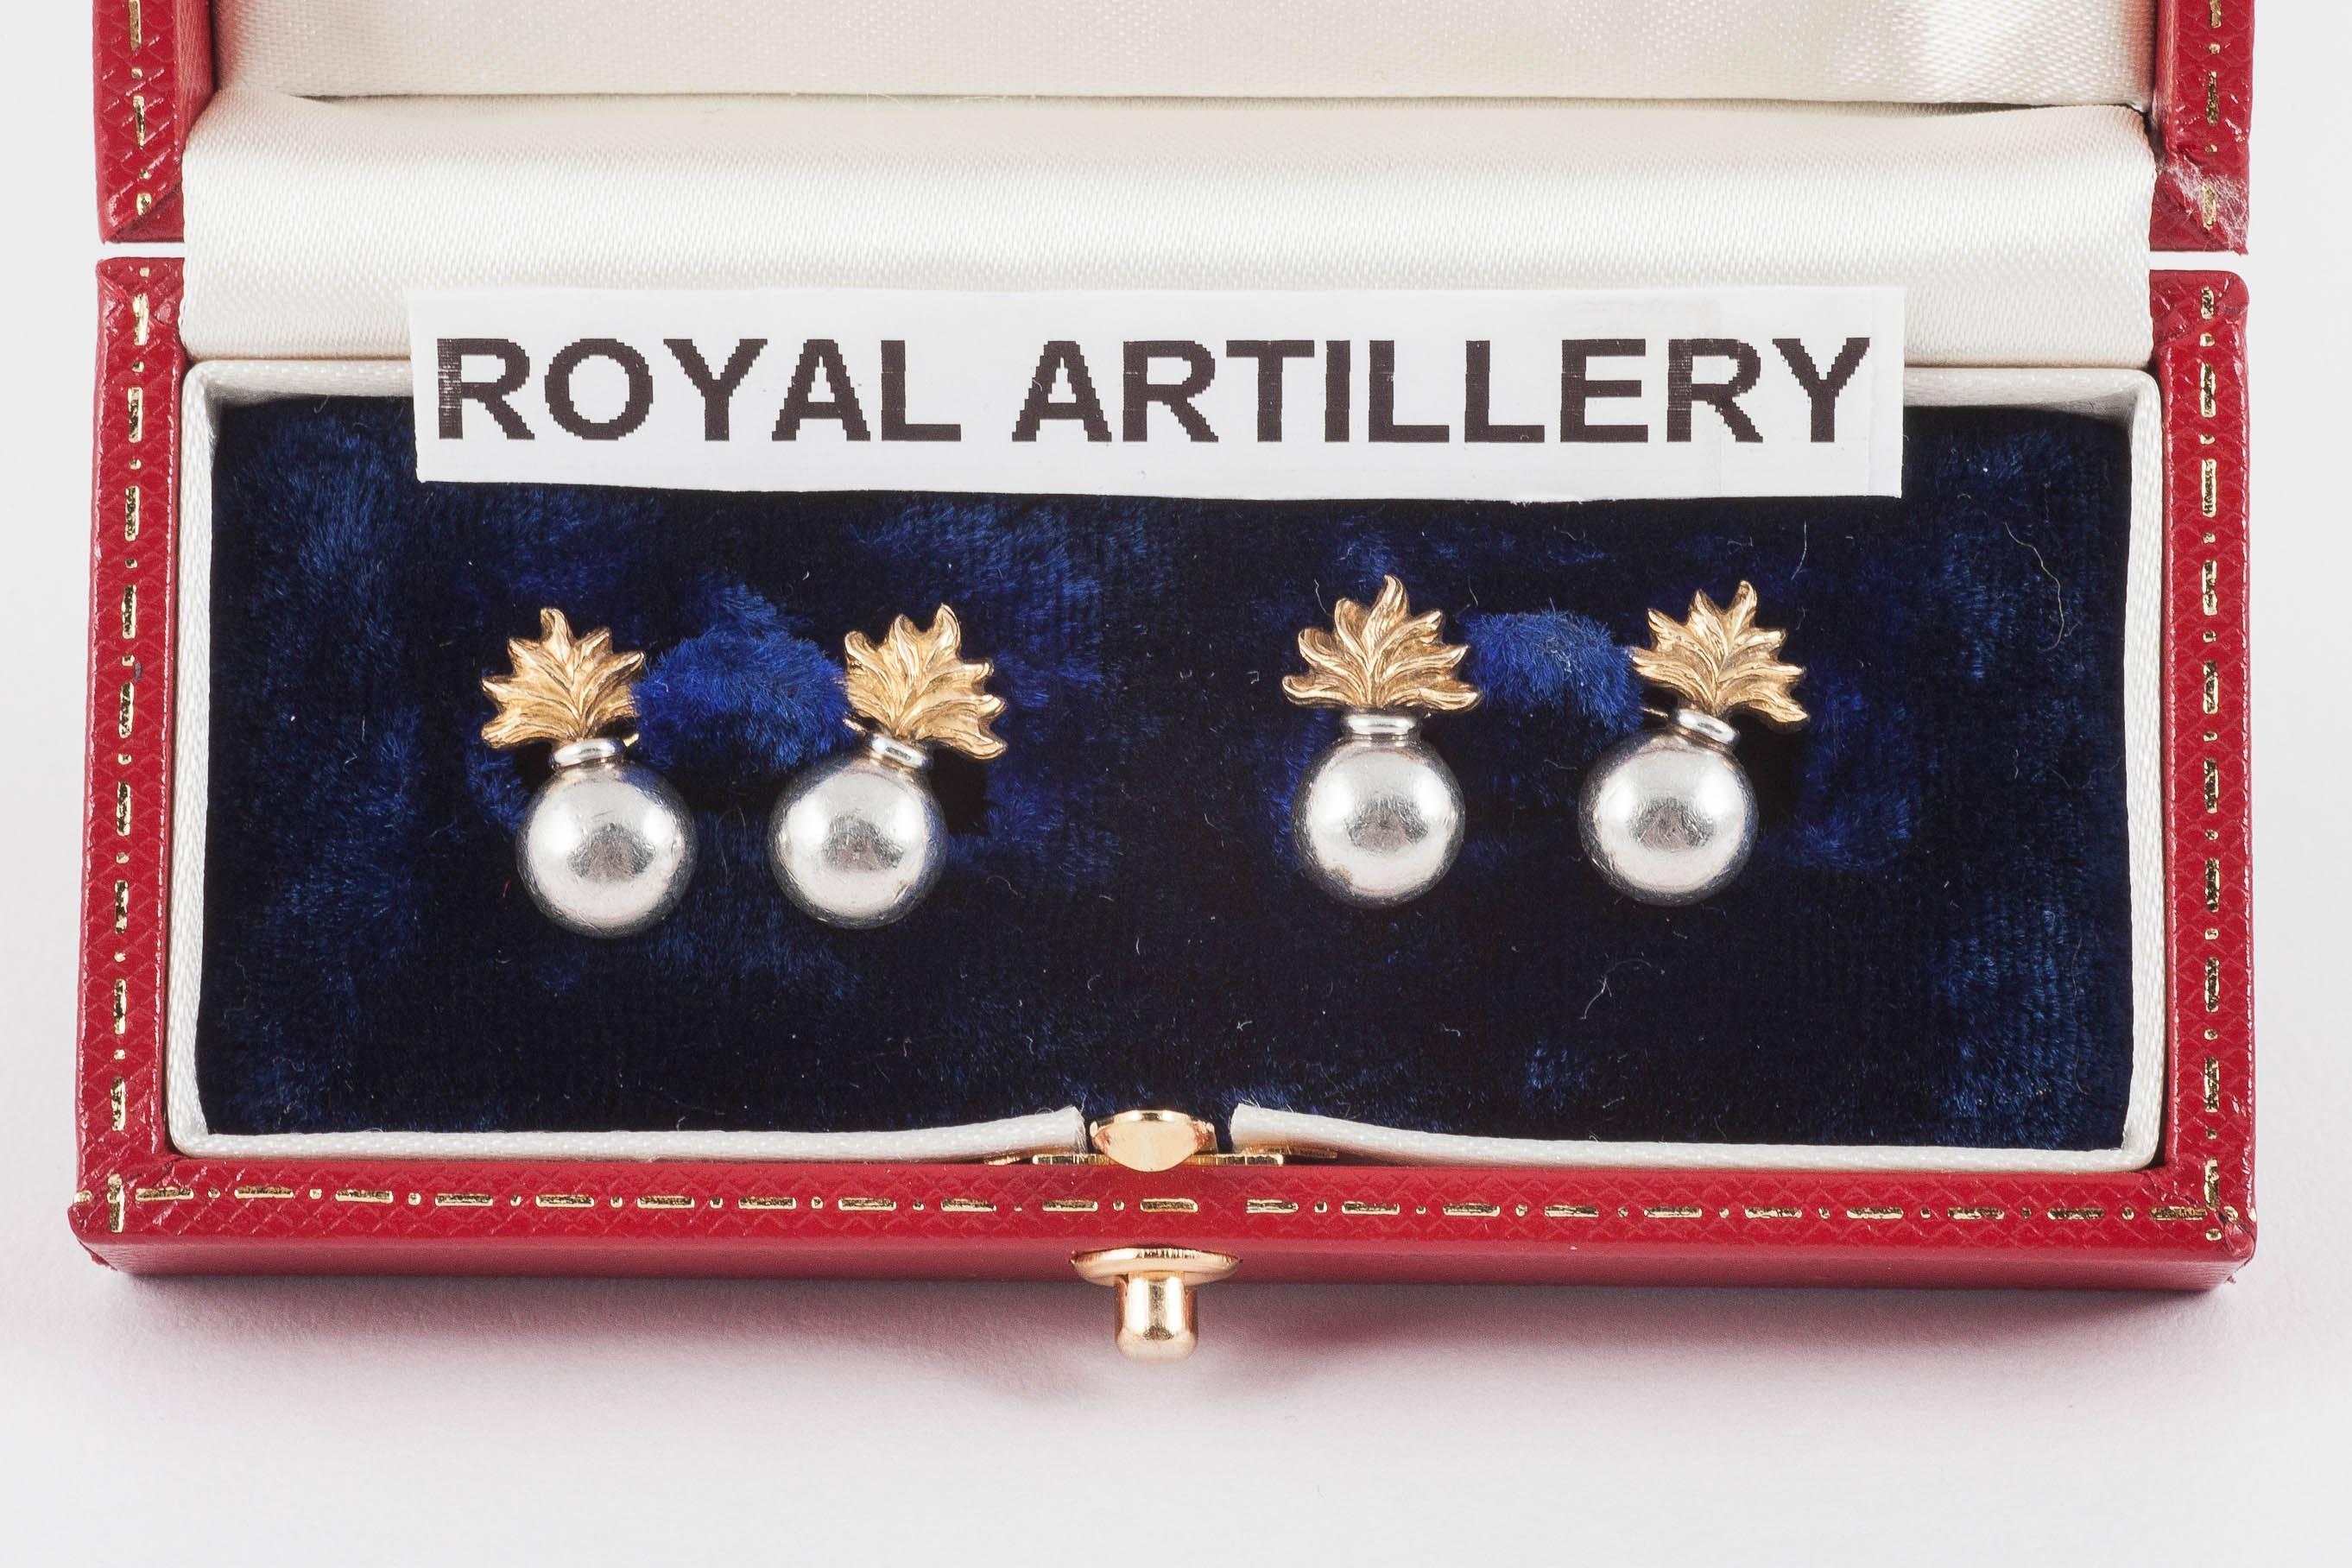 A heavy pair of 18 carat yellow gold and platinum double sided cufflinks of the emblem of the Royal Artillery. Chain link connections. The mixing of platinum with yellow gold is typical of this period, previously silver would have been used in place